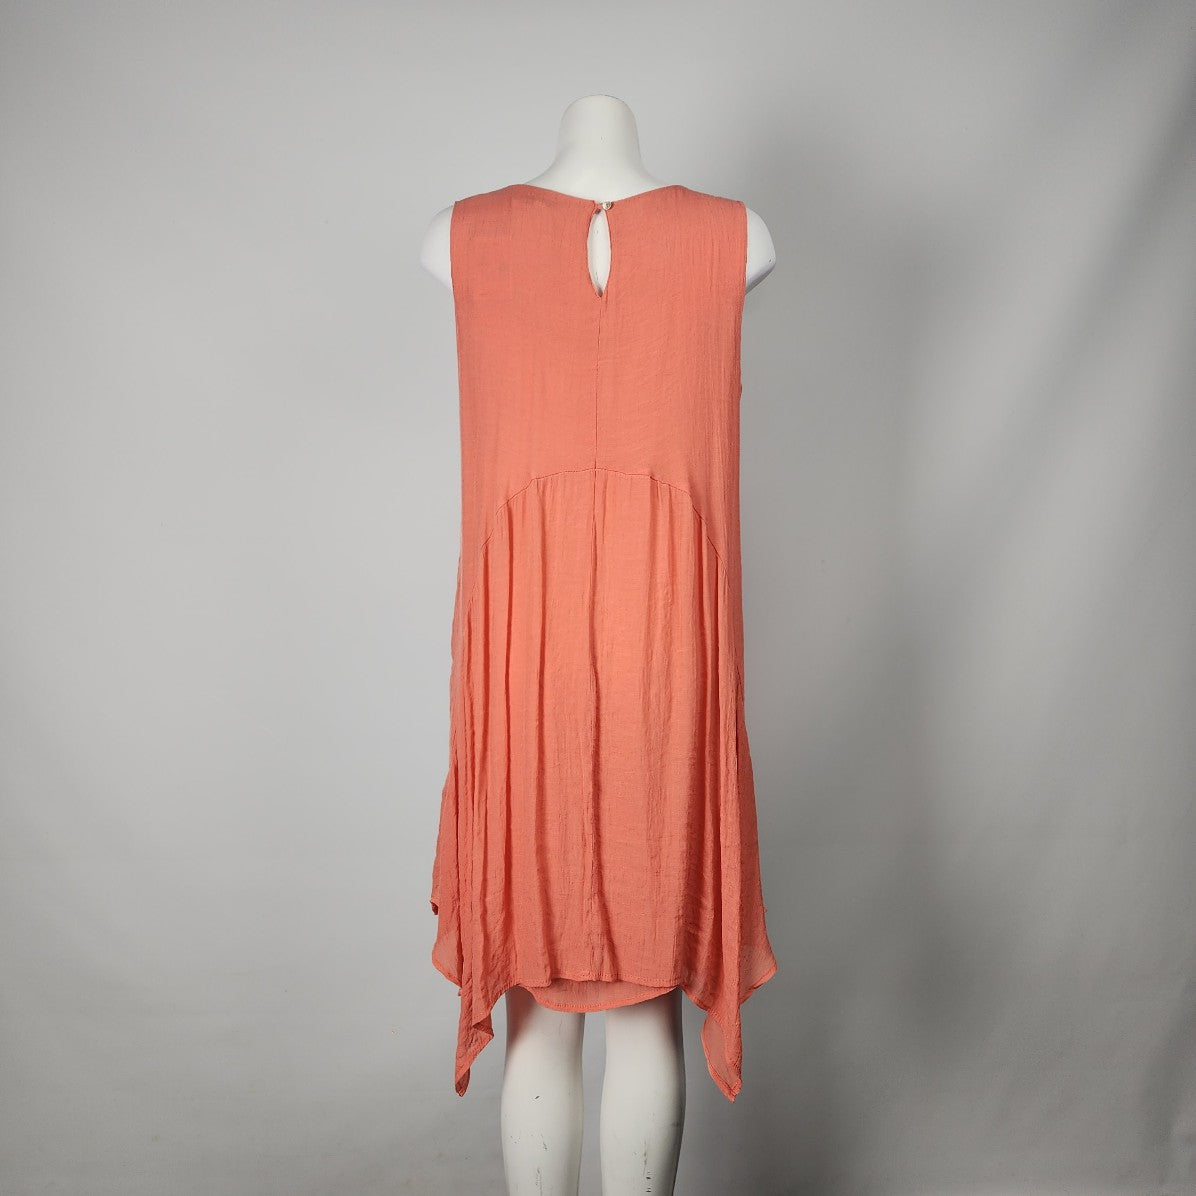 Fever Coral Knee Length Sleeveless Dress Size L